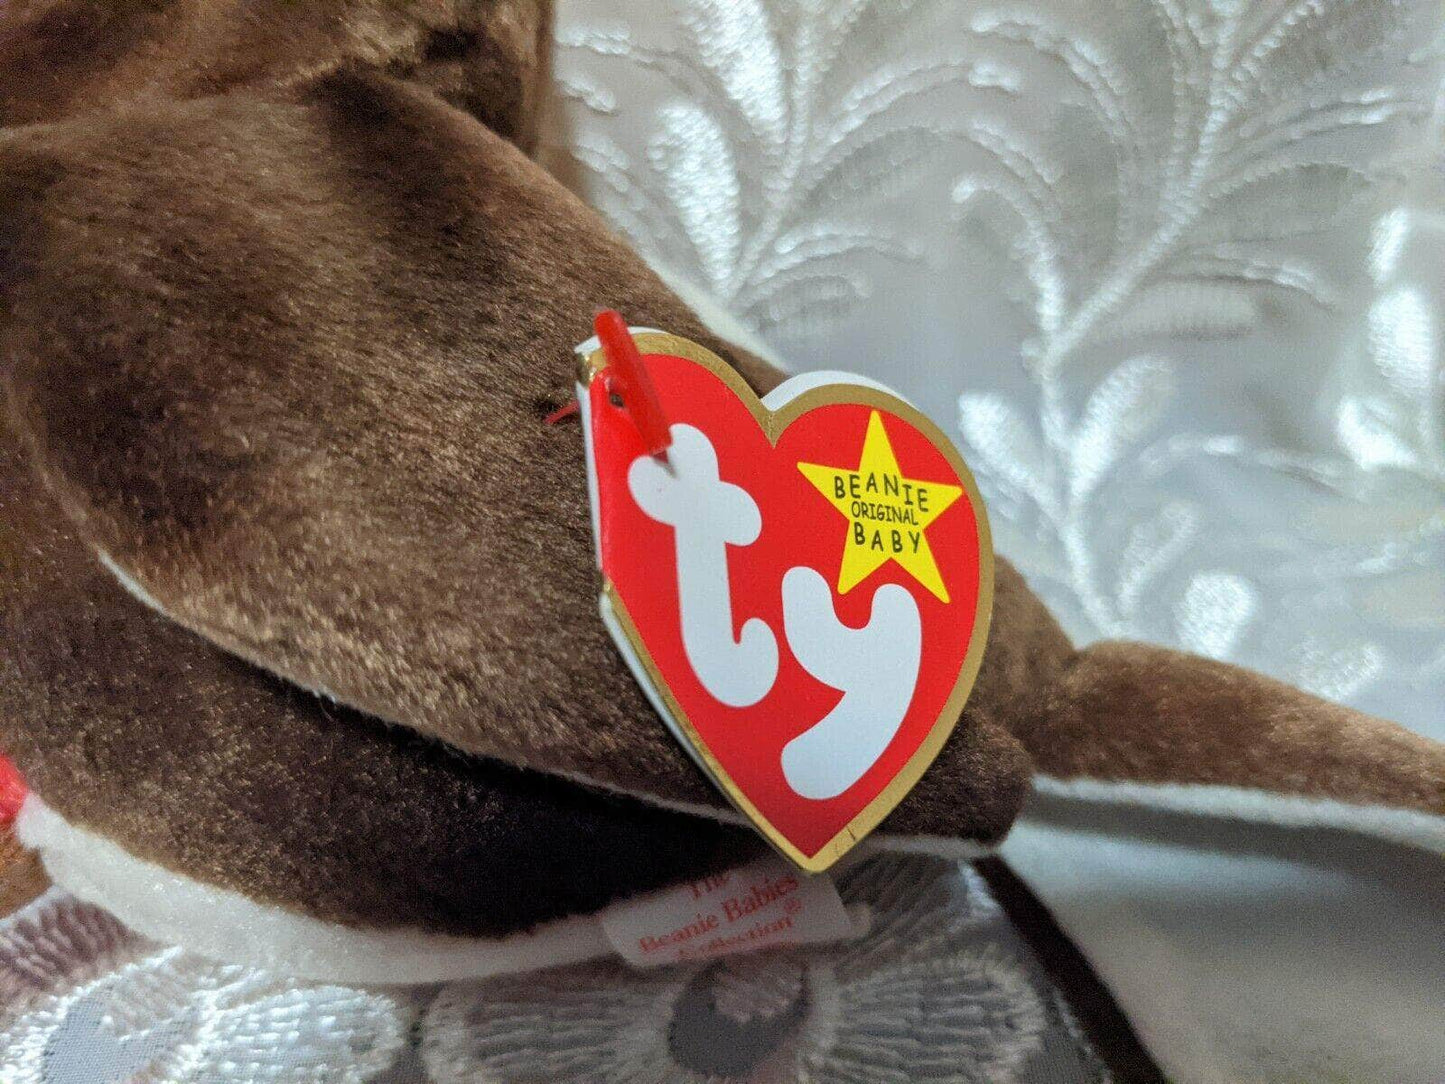 Ty Beanie Baby - Early The Robin Bird (4.5in) - Vintage Beanies Canada